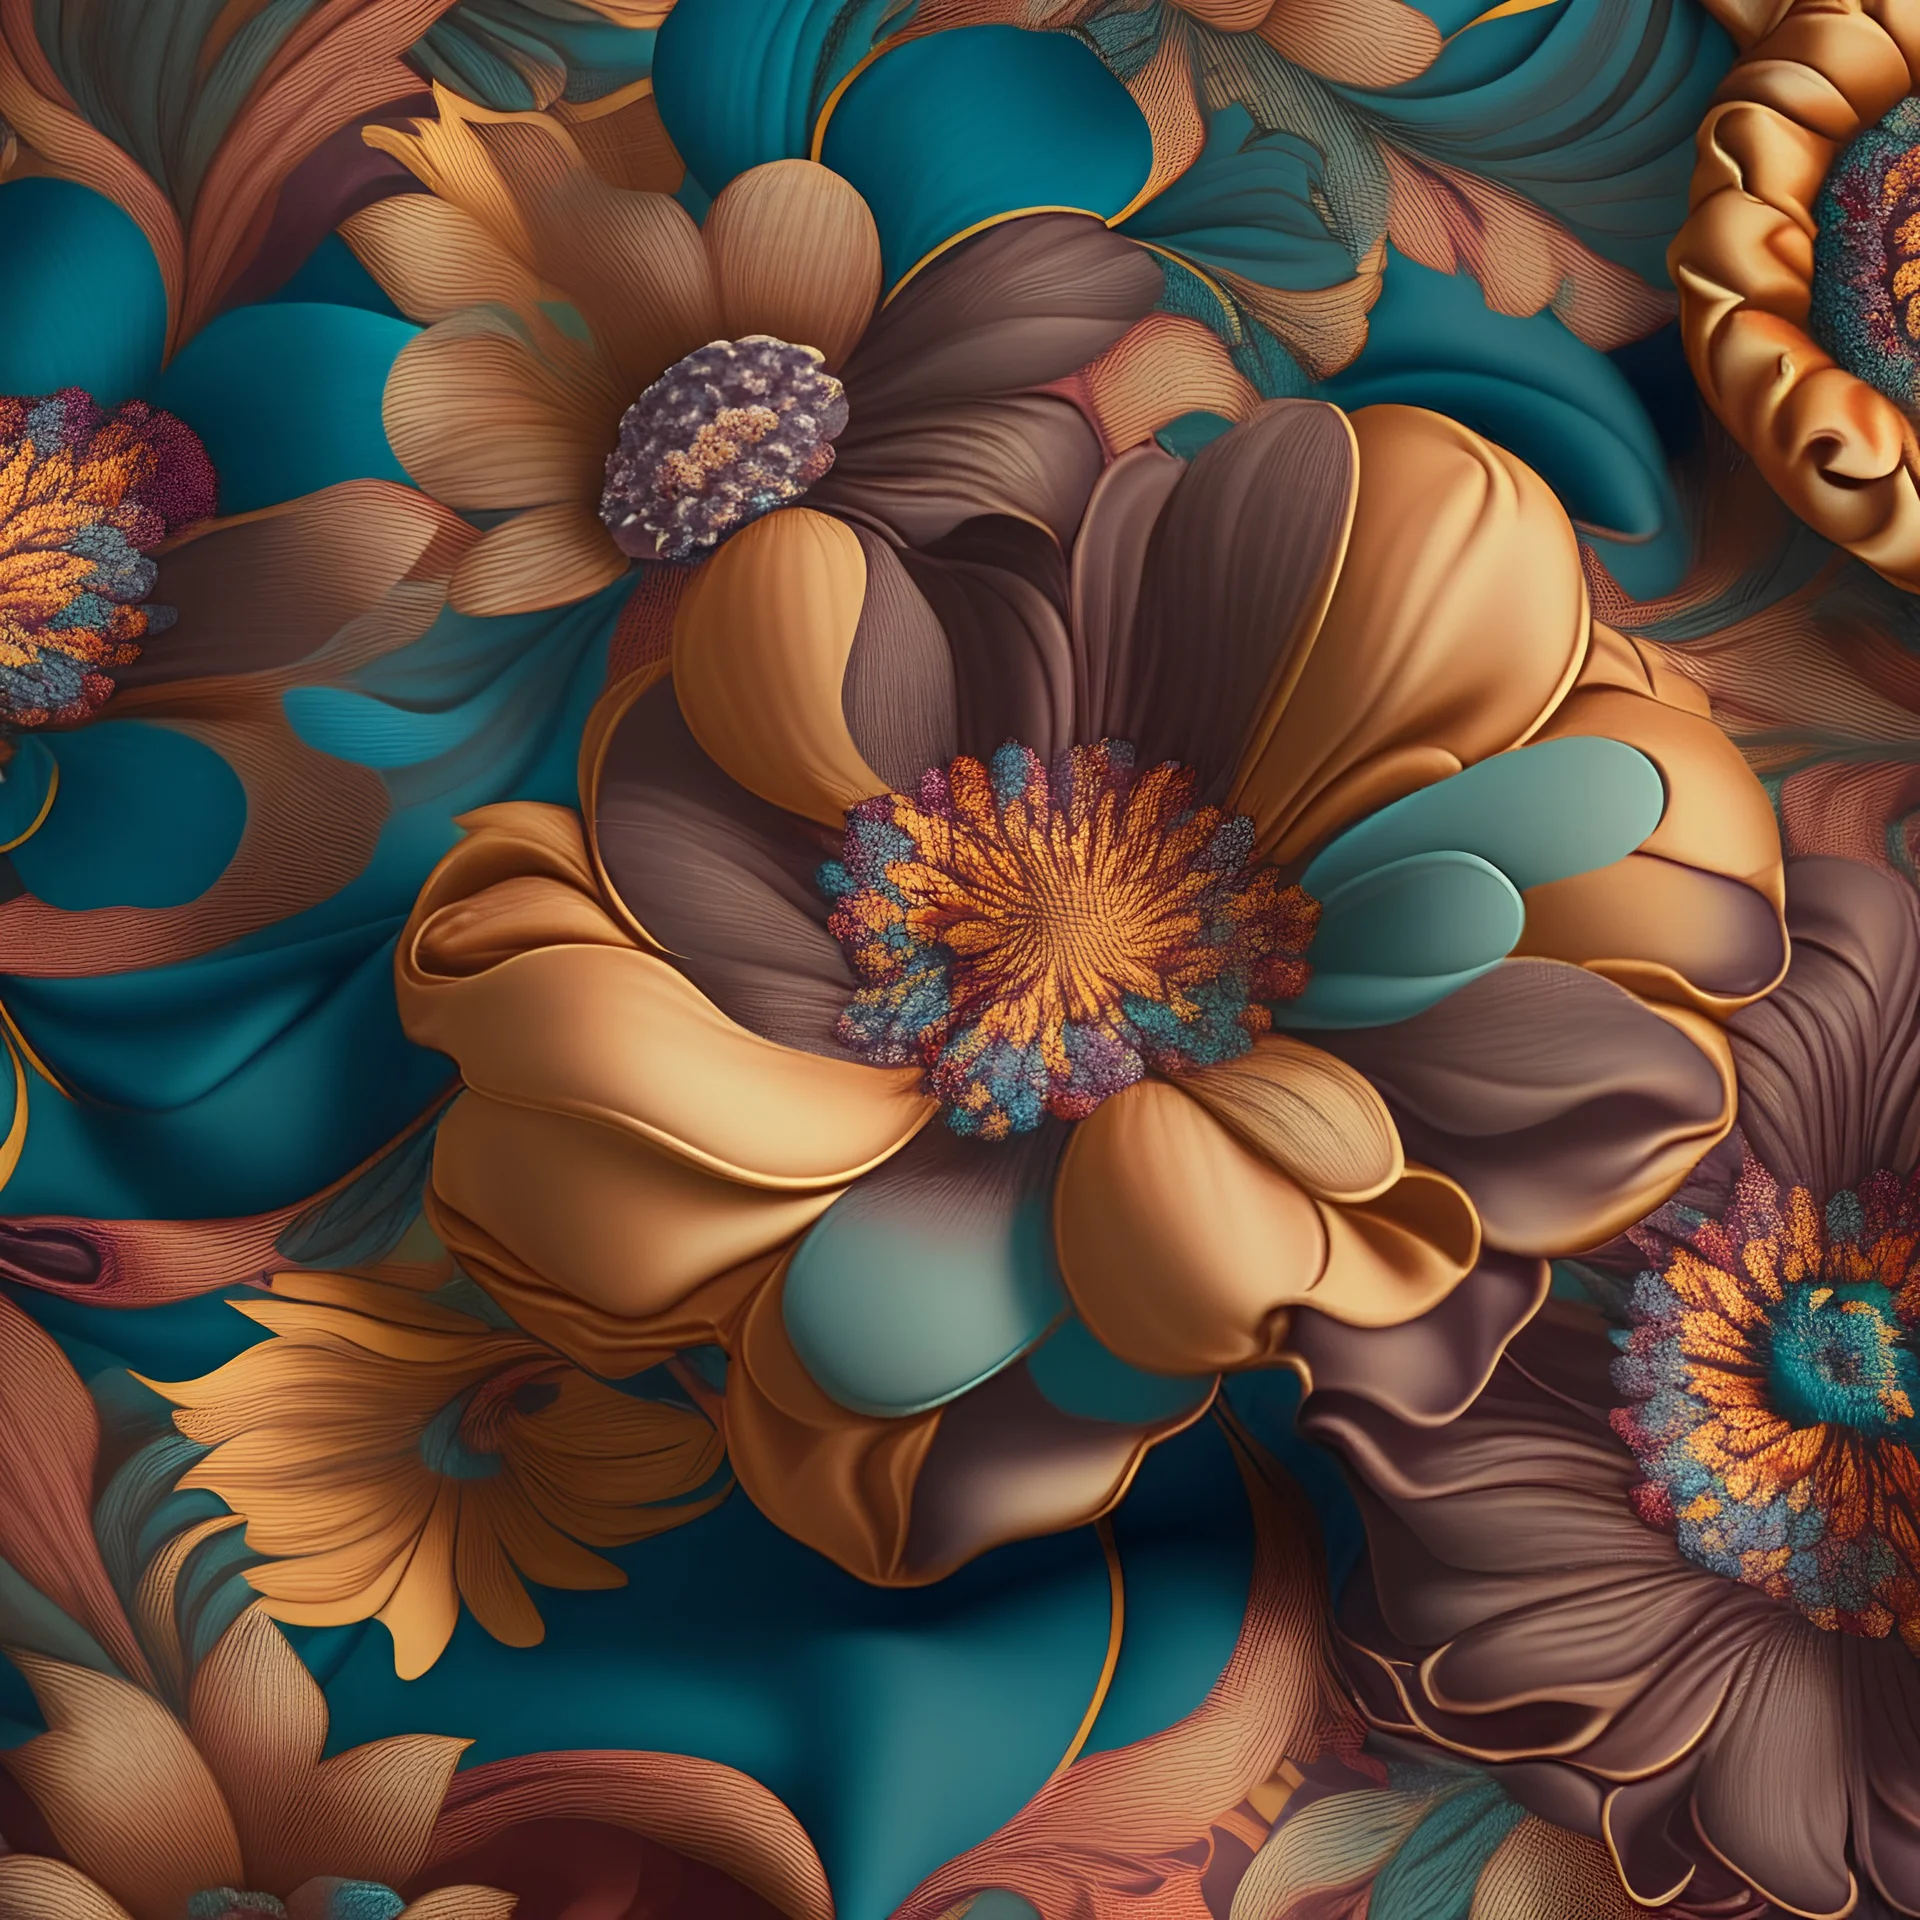 infinite pattern fabric tilabe, flat texture, georgette, flores warm colors, photorealistic effect